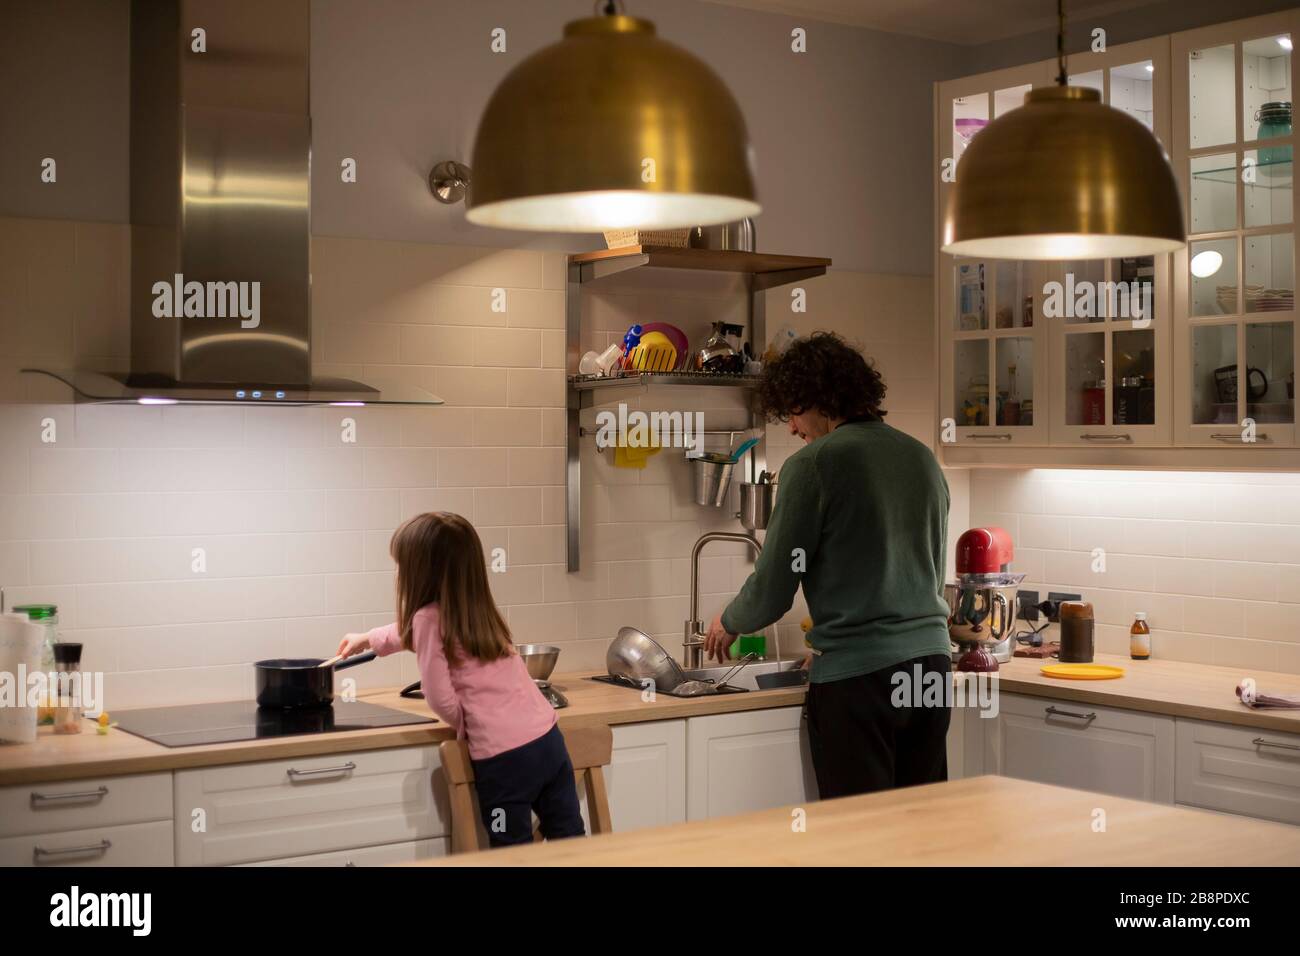 Young father and little child girl, back view, cooking together in modern, well lit white kitchen with big brass lamps. Lockdown activity idea. Stock Photo